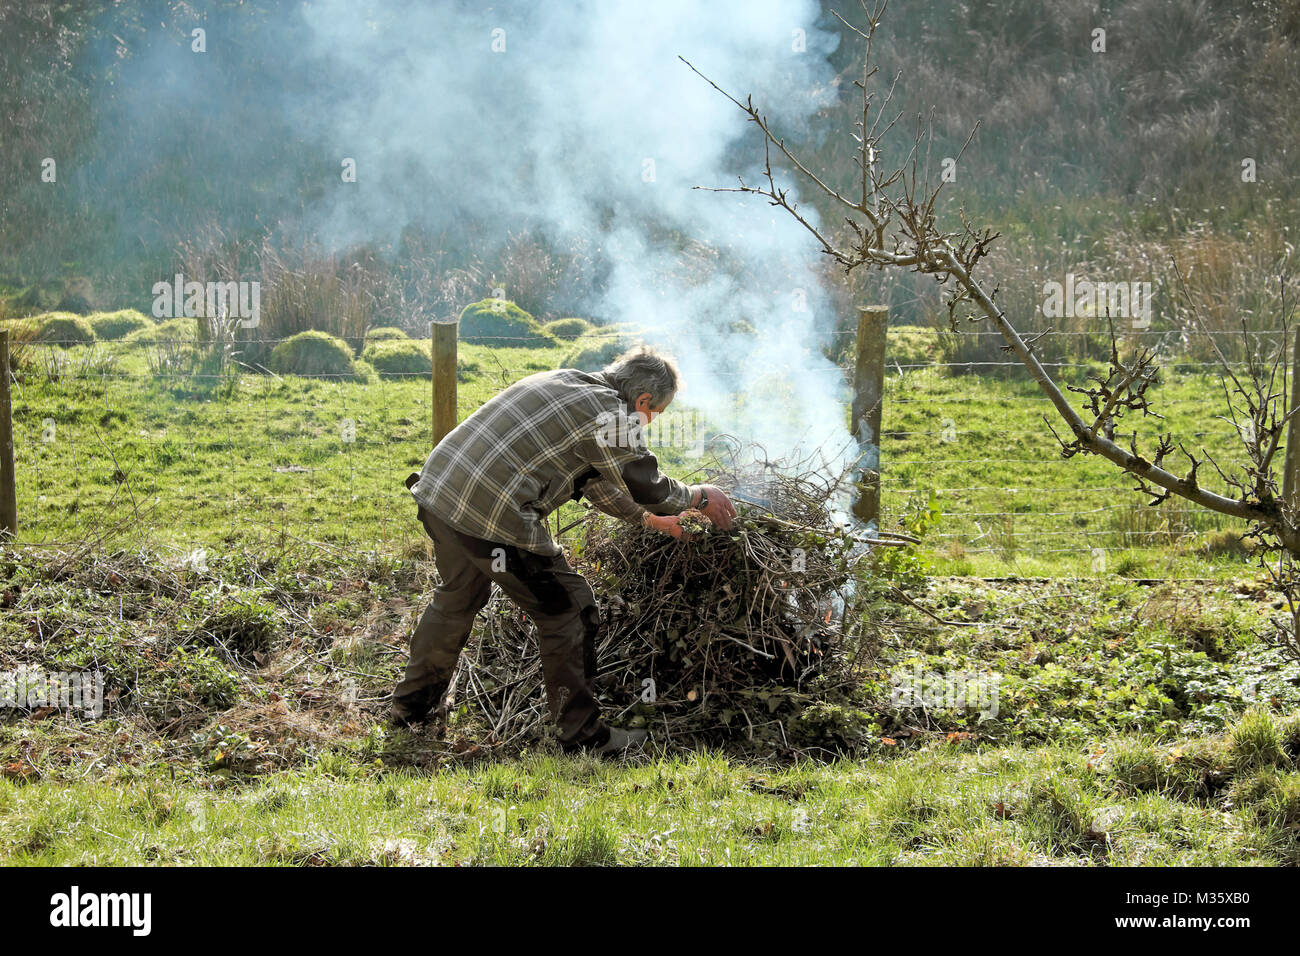 A man lighting making a bonfire in the garden tidying up and burning old sticks and branches garden waste in winter February Wales UK  KATHY DEWITT Stock Photo